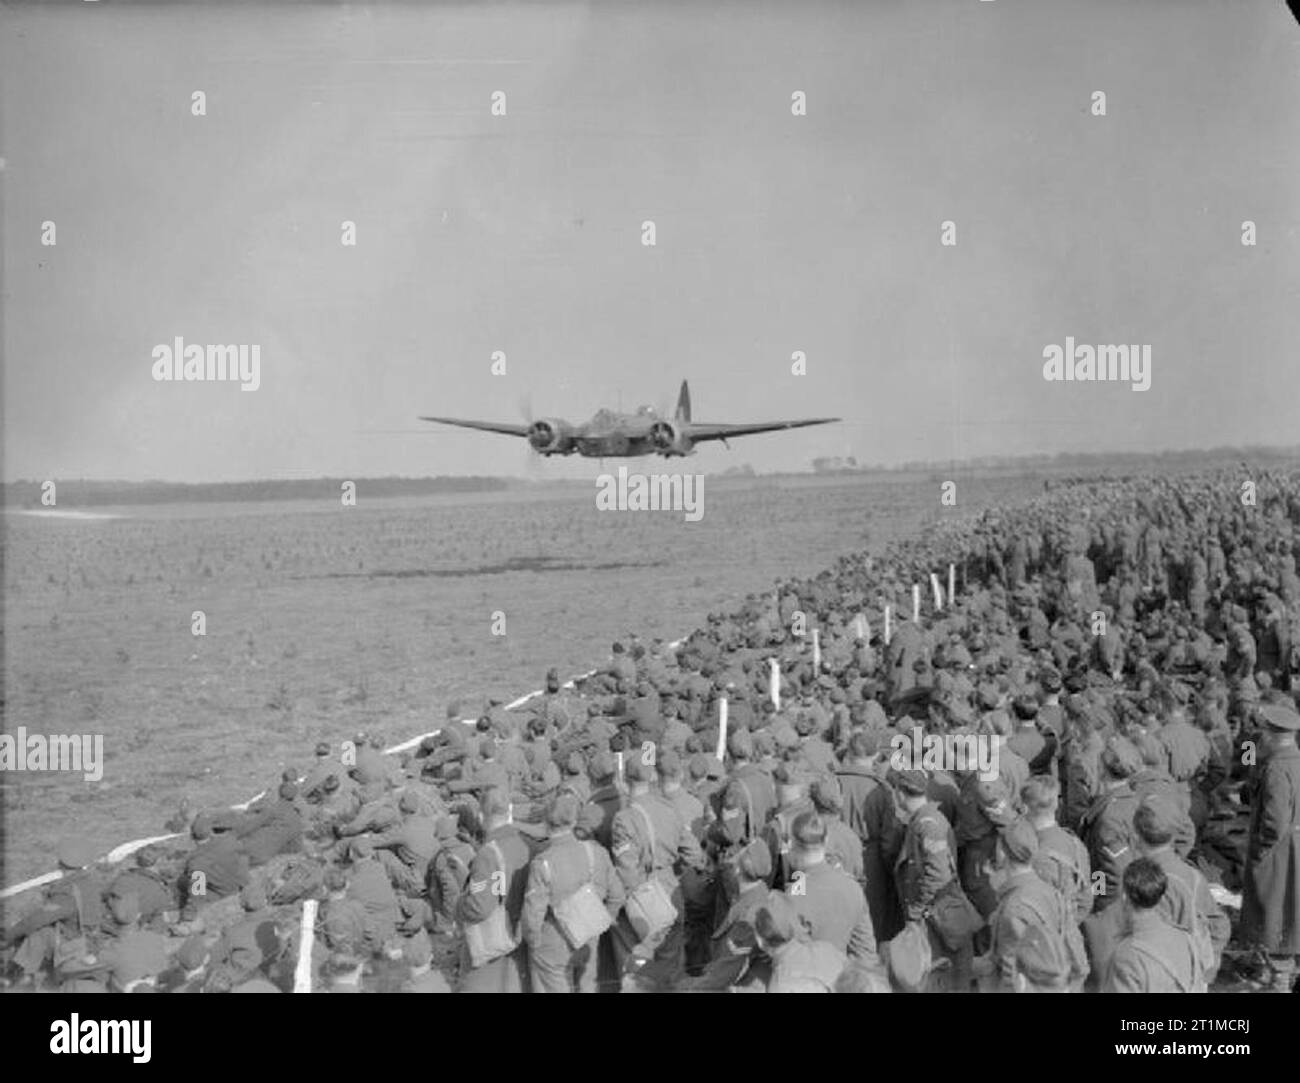 The British Army in the United Kingdom 1939-45 An RAF Blenheim IV light bomber flies low to lay a smokescreen during a demonstration of air power in front of a gathering of Regular and Home Guard officers and NCOs in East Anglia, 29 March 1942. During the display fighter aircraft strafed ground targets, bombers carried out low-level attacks and parachute and glider forces were also deployed. Stock Photo